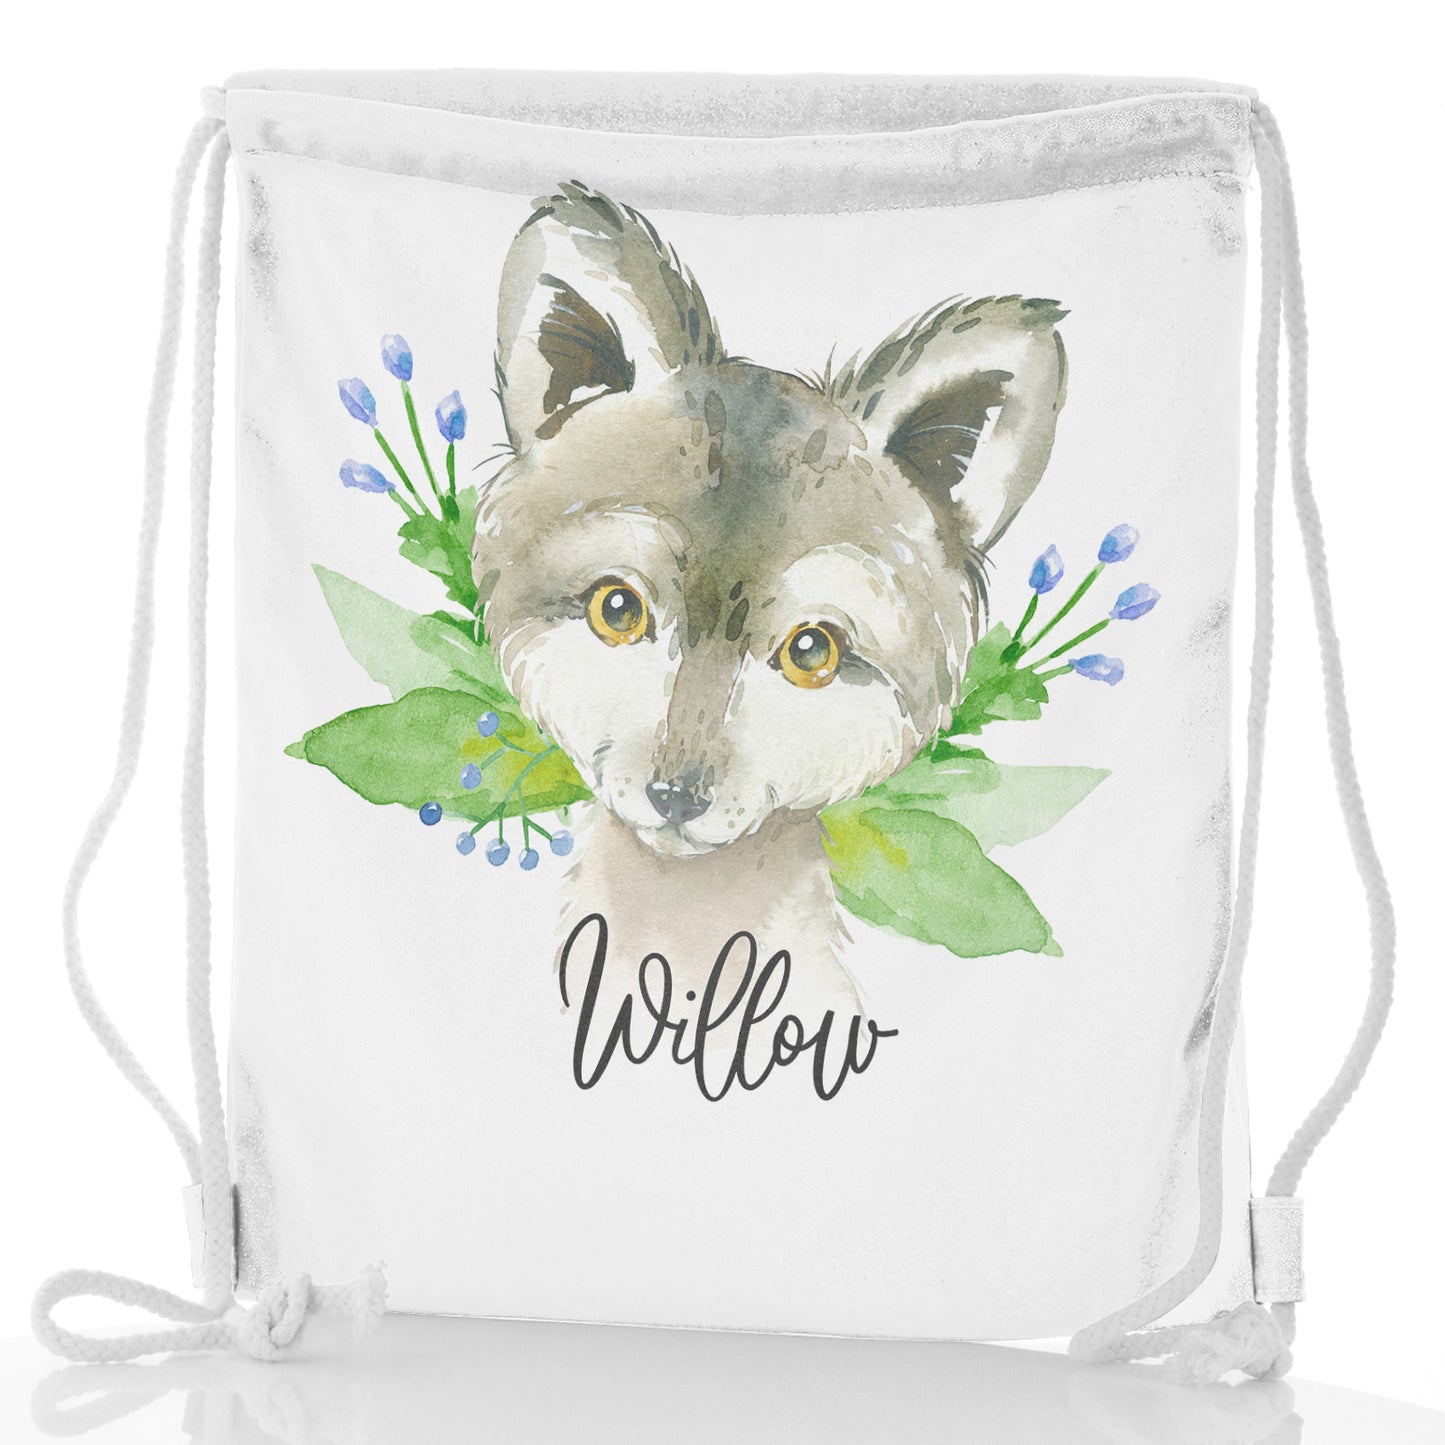 Personalised Glitter Drawstring Backpack with Grey Wolf Blue Flowers and Cute Text